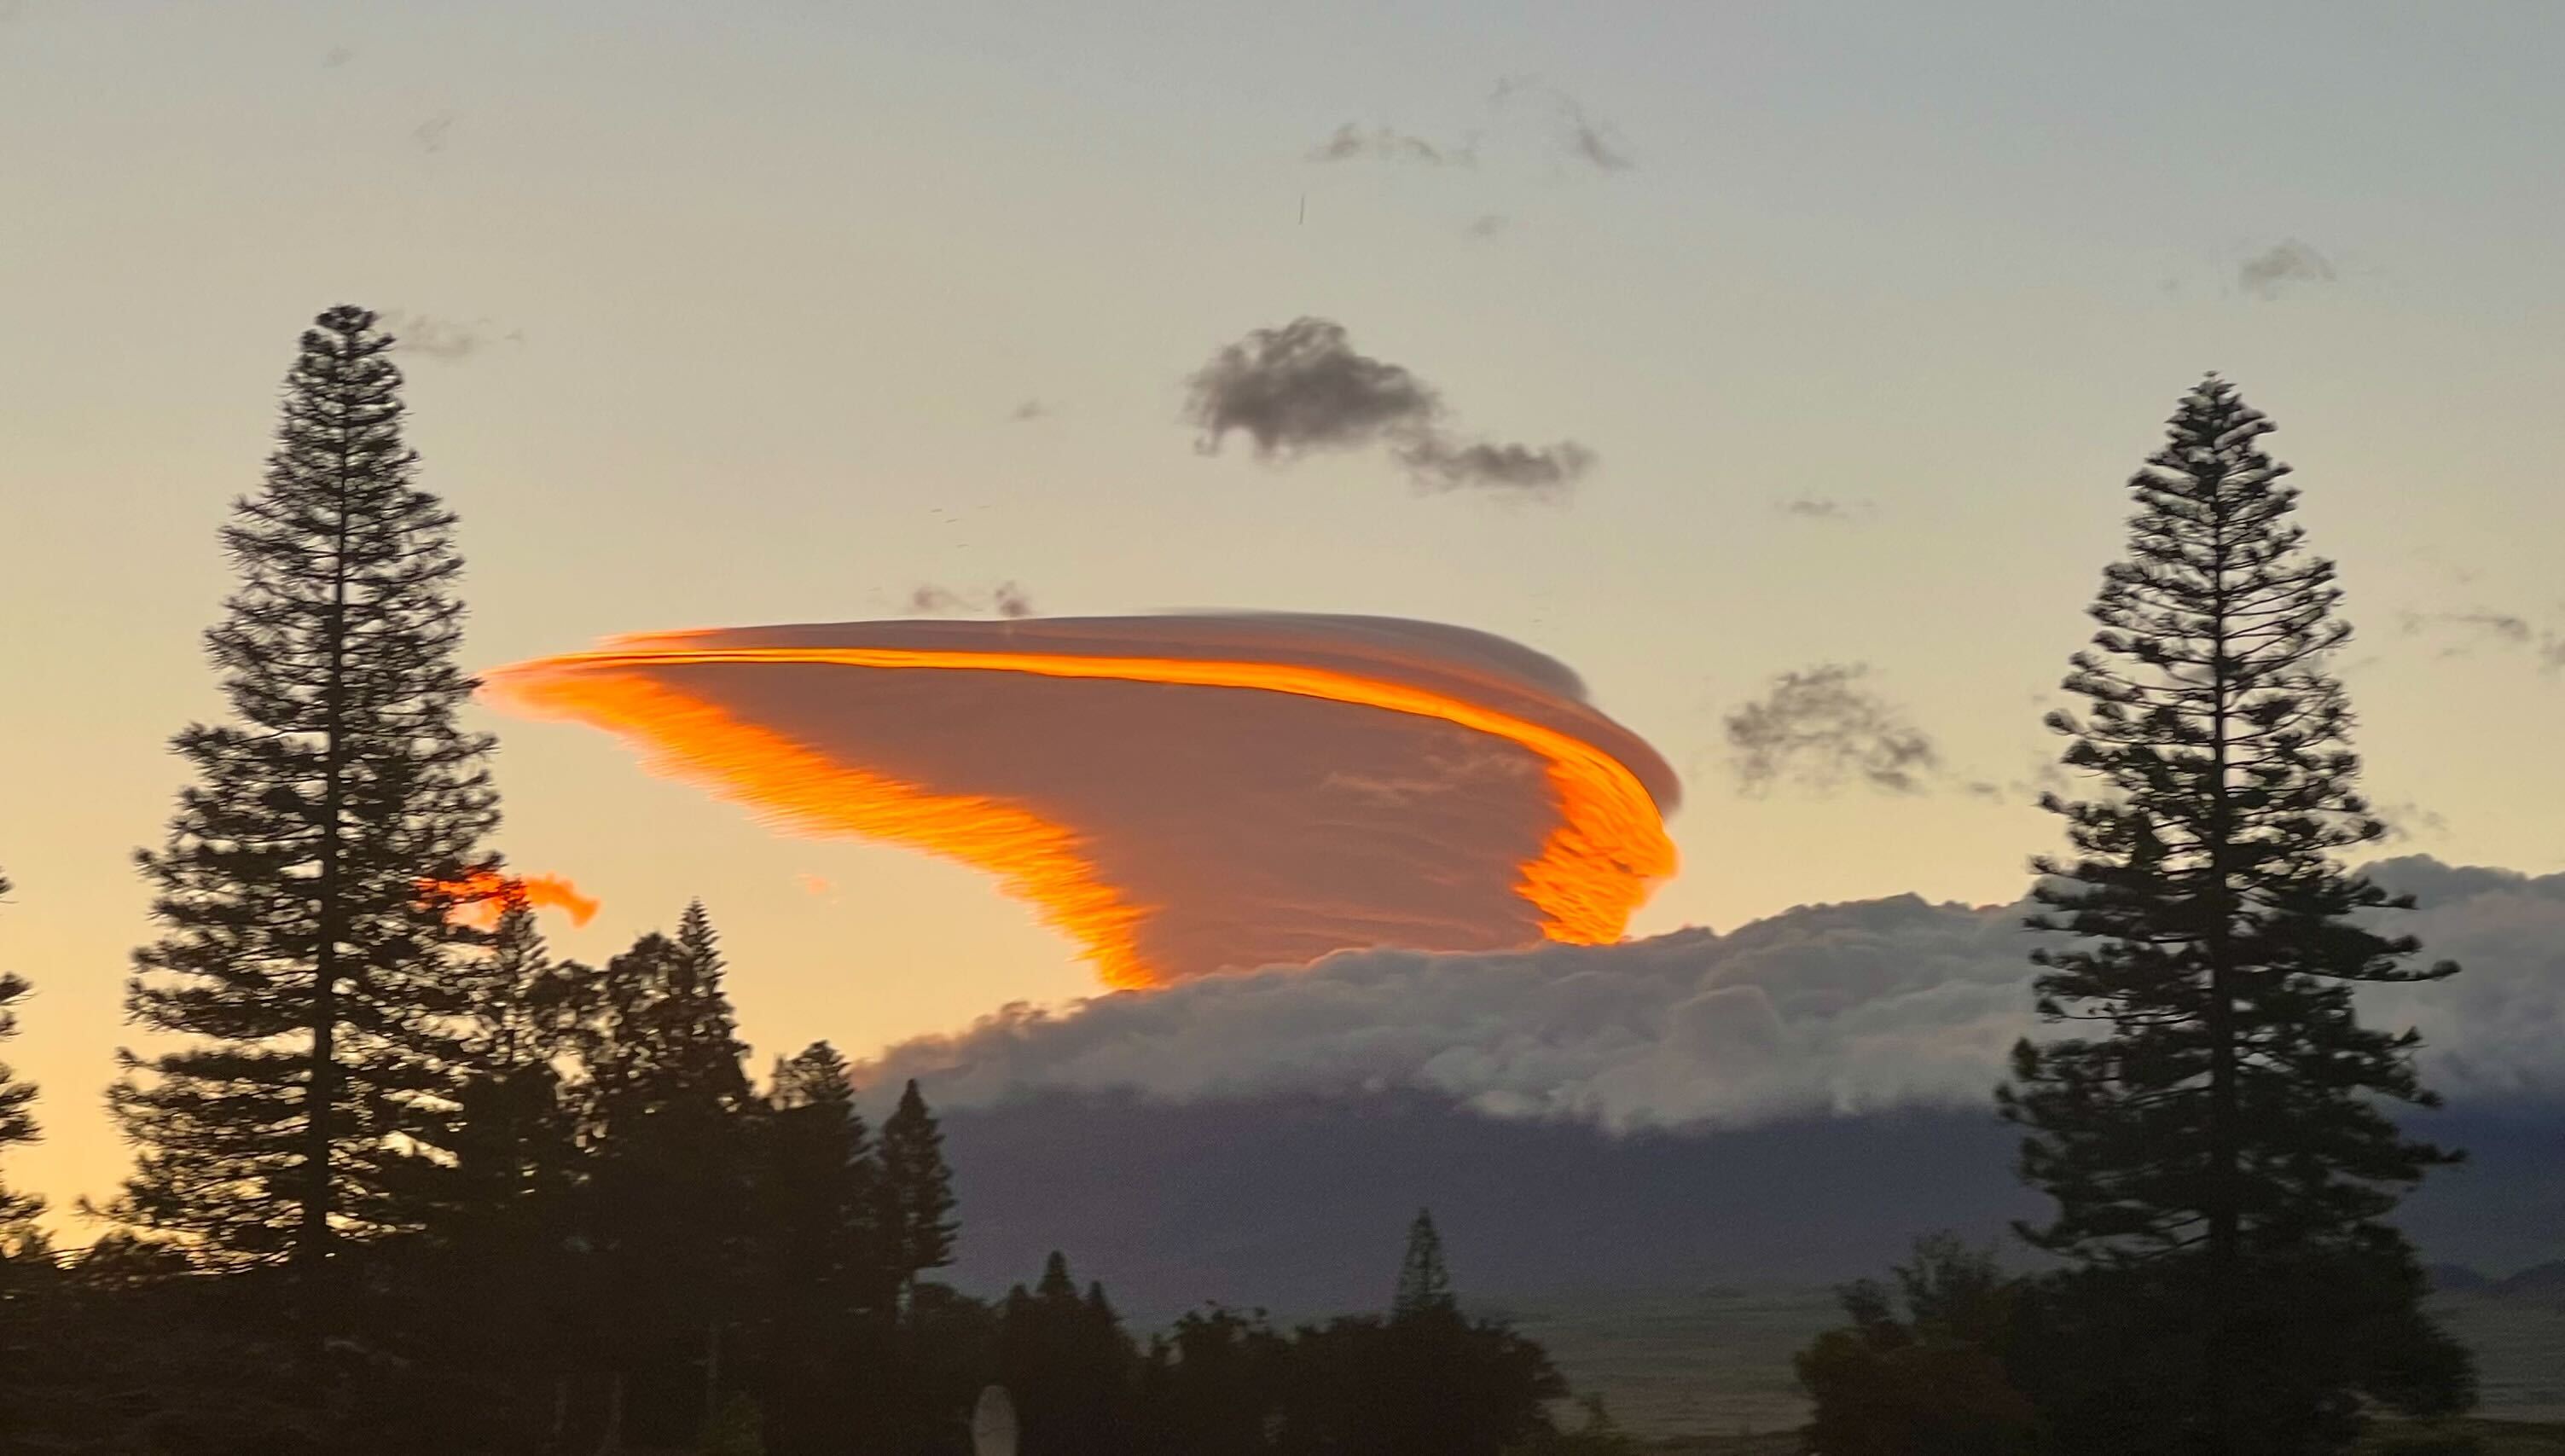 a spiral-shaped cloud is lit in bright red and gold at sunset above a mountain